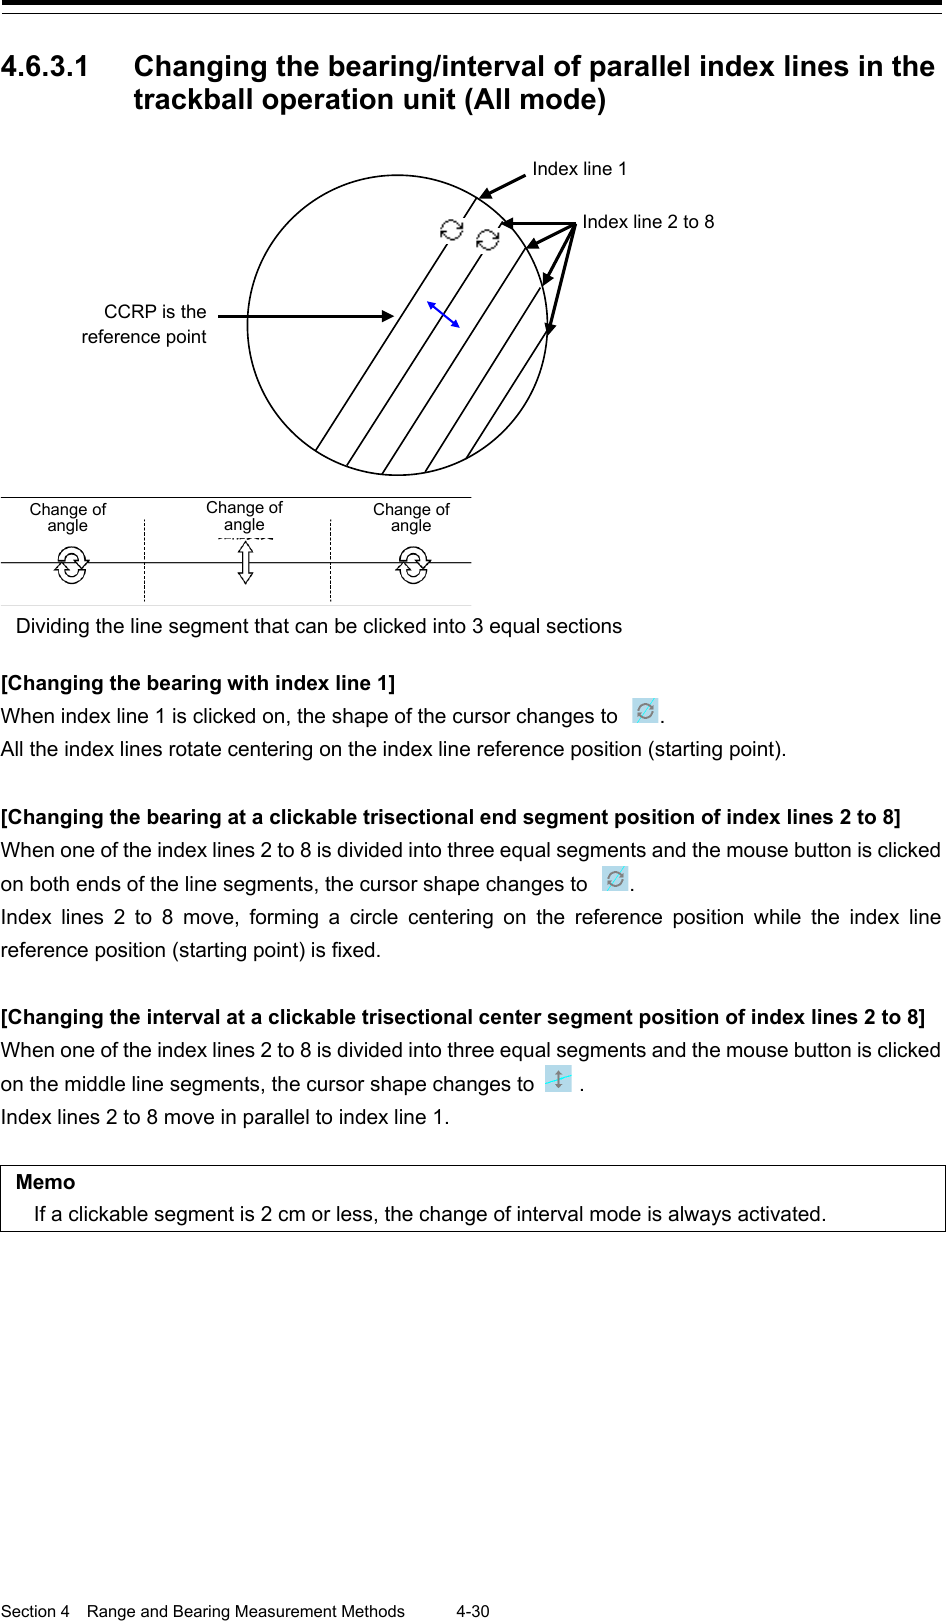  Section 4  Range and Bearing Measurement Methods 4-30  4.6.3.1 Changing the bearing/interval of parallel index lines in the trackball operation unit (All mode)            [Changing the bearing with index line 1] When index line 1 is clicked on, the shape of the cursor changes to  . All the index lines rotate centering on the index line reference position (starting point).  [Changing the bearing at a clickable trisectional end segment position of index lines 2 to 8]   When one of the index lines 2 to 8 is divided into three equal segments and the mouse button is clicked on both ends of the line segments, the cursor shape changes to  . Index lines 2 to 8 move, forming a circle centering on the reference position while the index line reference position (starting point) is fixed.  [Changing the interval at a clickable trisectional center segment position of index lines 2 to 8]   When one of the index lines 2 to 8 is divided into three equal segments and the mouse button is clicked on the middle line segments, the cursor shape changes to  . Index lines 2 to 8 move in parallel to index line 1.  Memo If a clickable segment is 2 cm or less, the change of interval mode is always activated.    Change of angle Change of angle Change of angle Dividing the line segment that can be clicked into 3 equal sections      CCRP is the  reference point Index line 1 Index line 2 to 8 